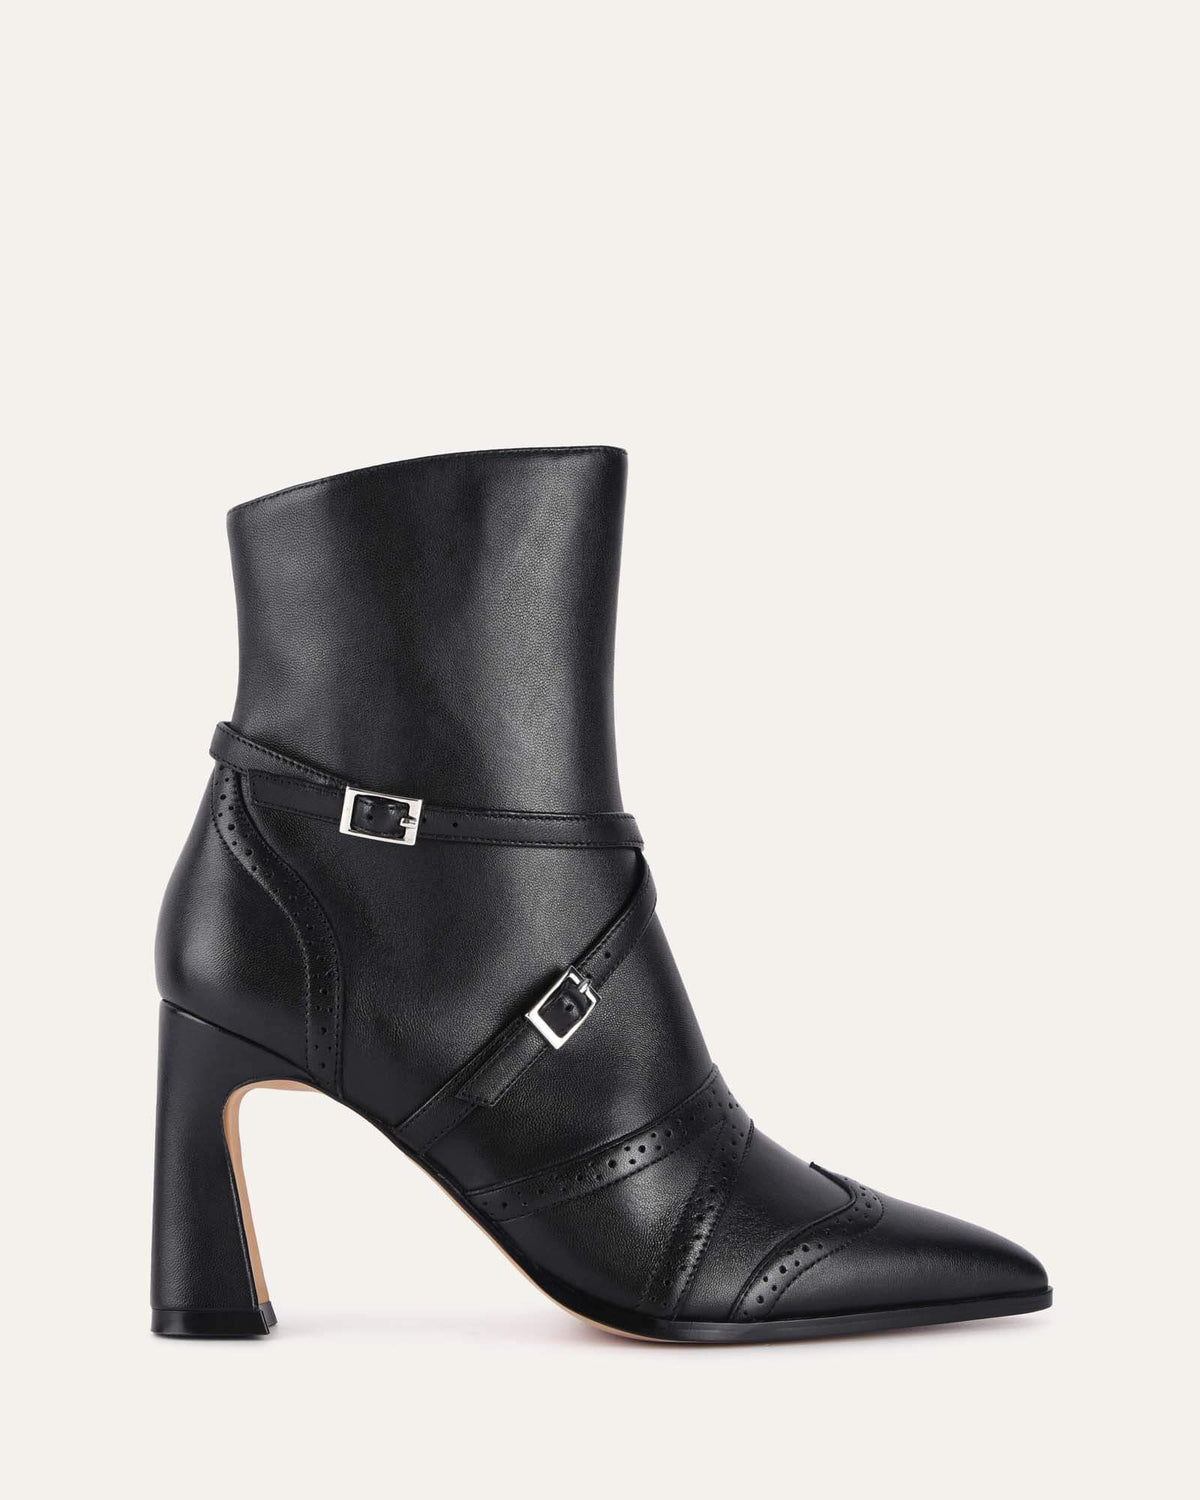 VIENNA HIGH ANKLE BOOTS BLACK LEATHER